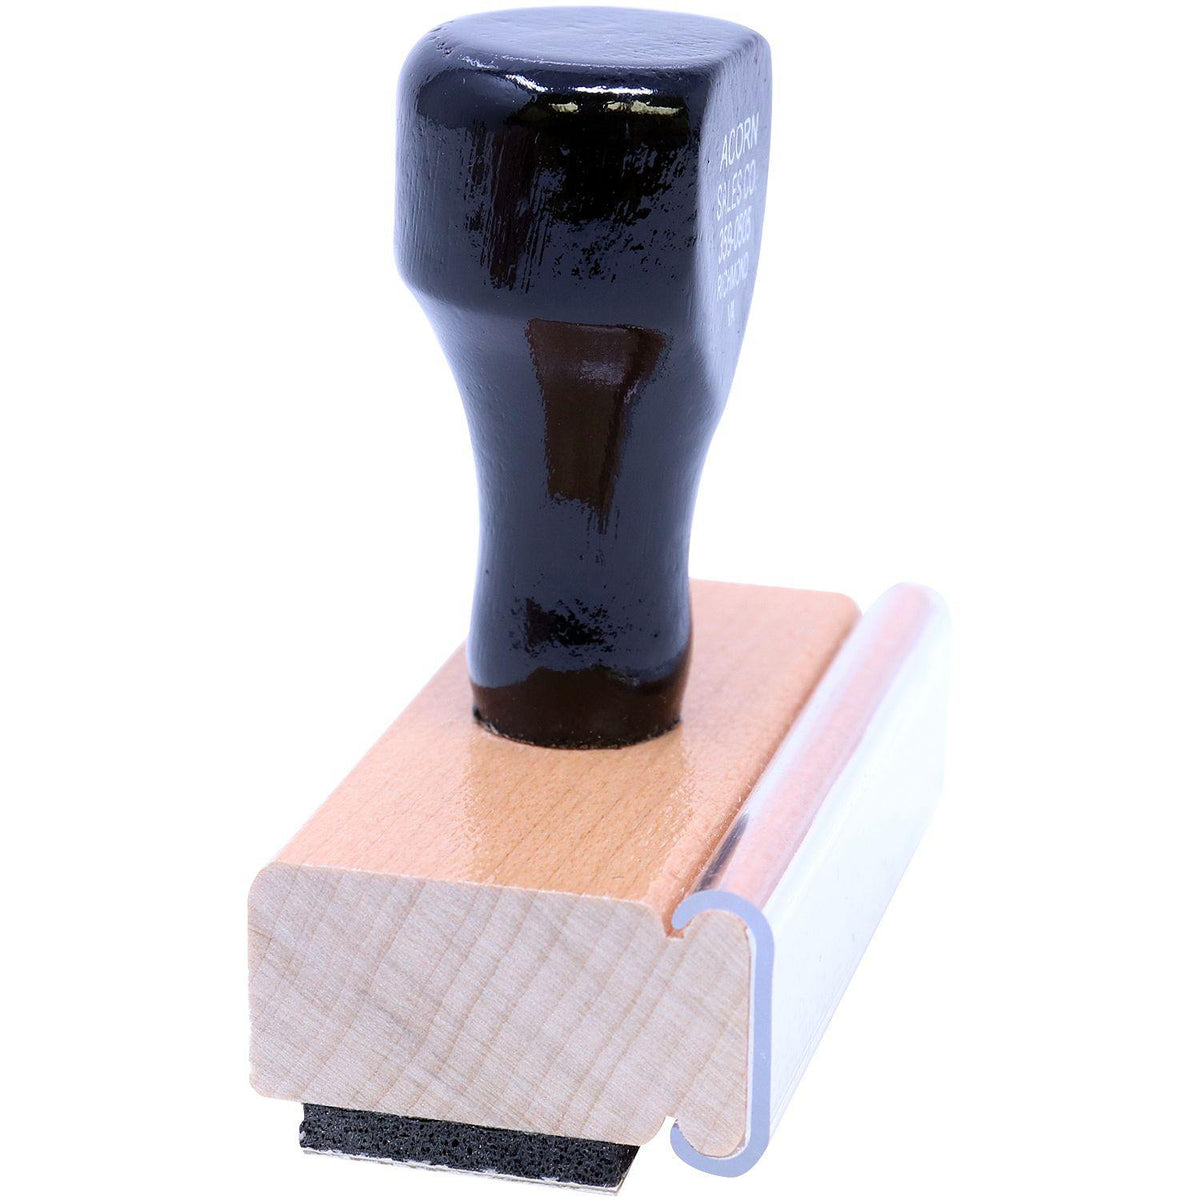 Medigap Rubber Stamp - Engineer Seal Stamps - Brand_Acorn, Impression Size_Small, Stamp Type_Regular Stamp, Type of Use_Medical Office